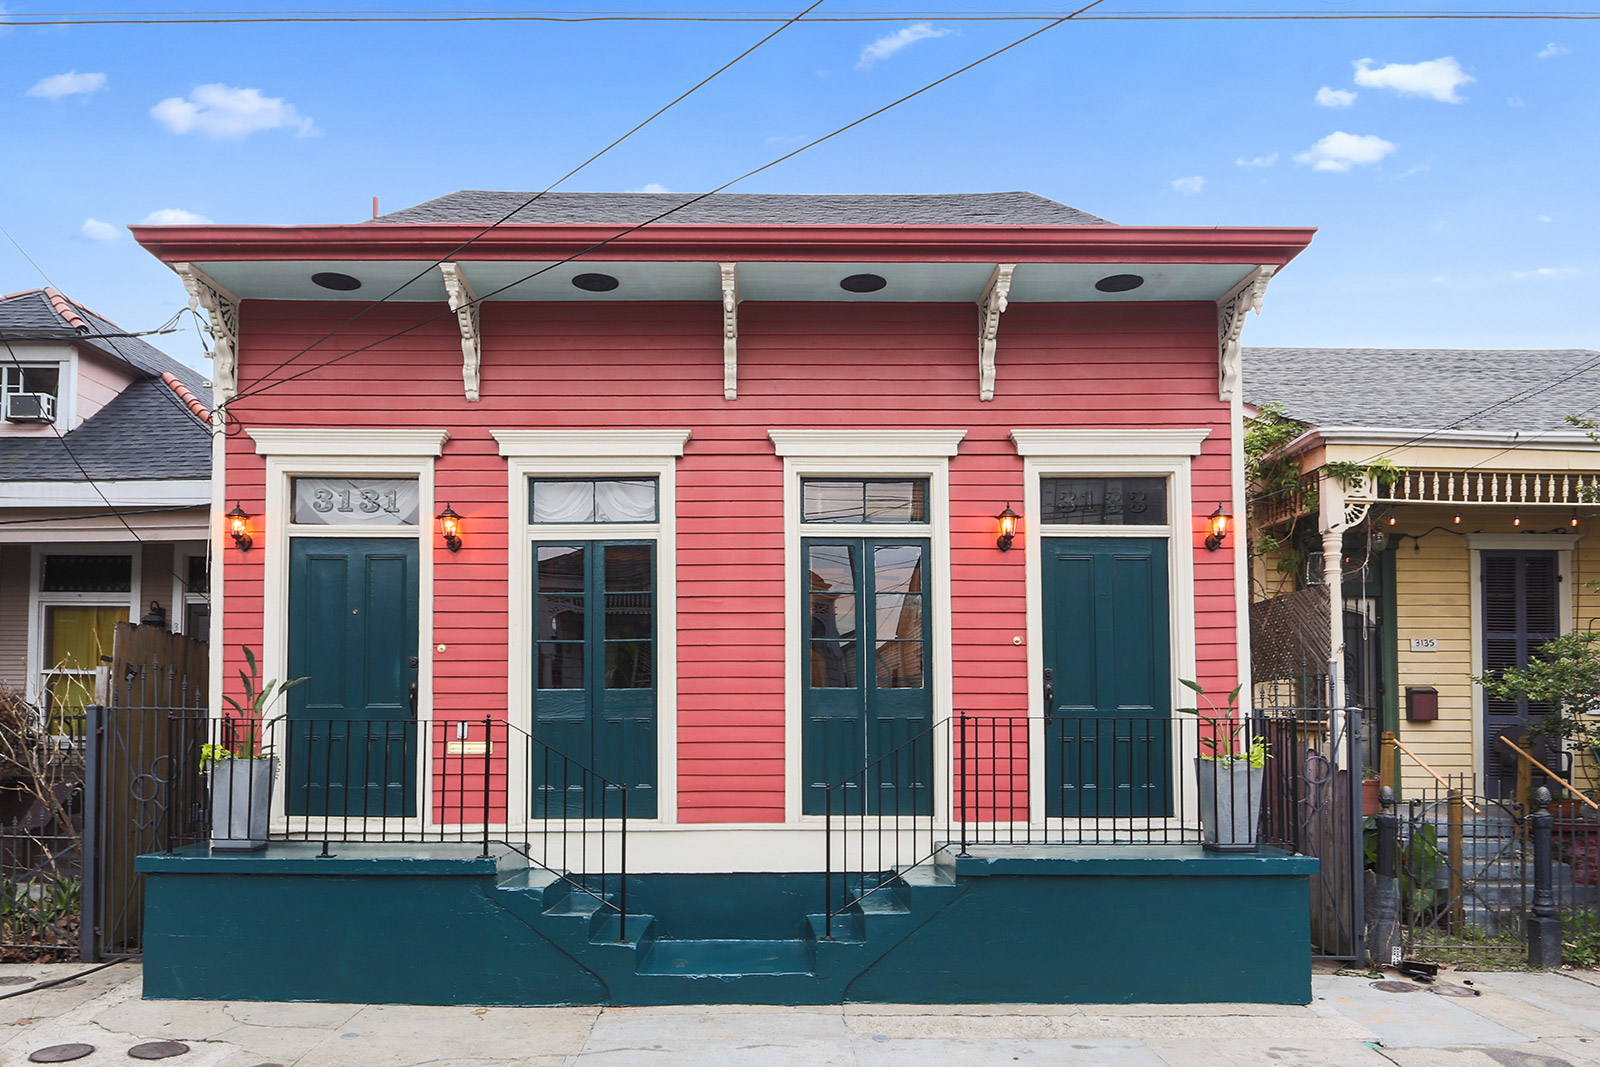 Bywater is a neighborhood of the city of New Orleans.